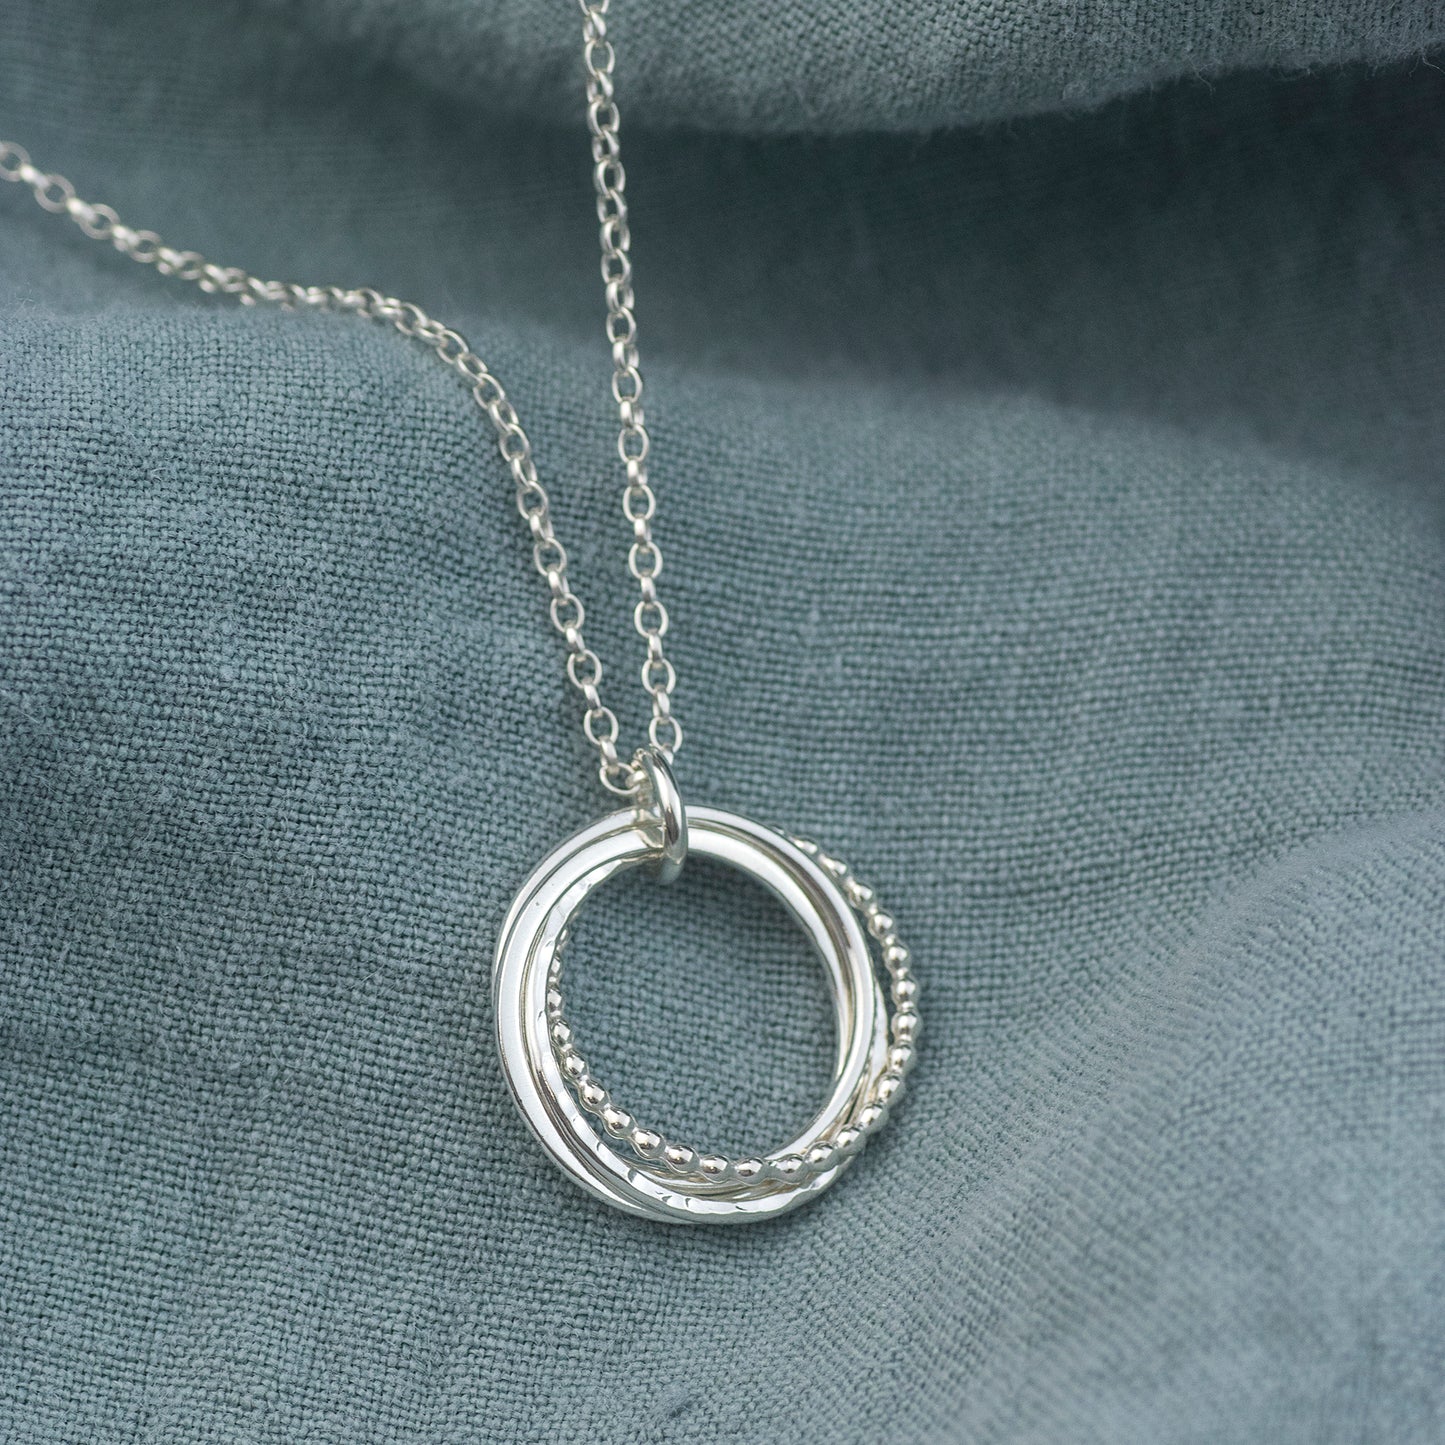 4th Anniversary Necklace - The Original 4 Rings for 4 Years Necklace - Silver